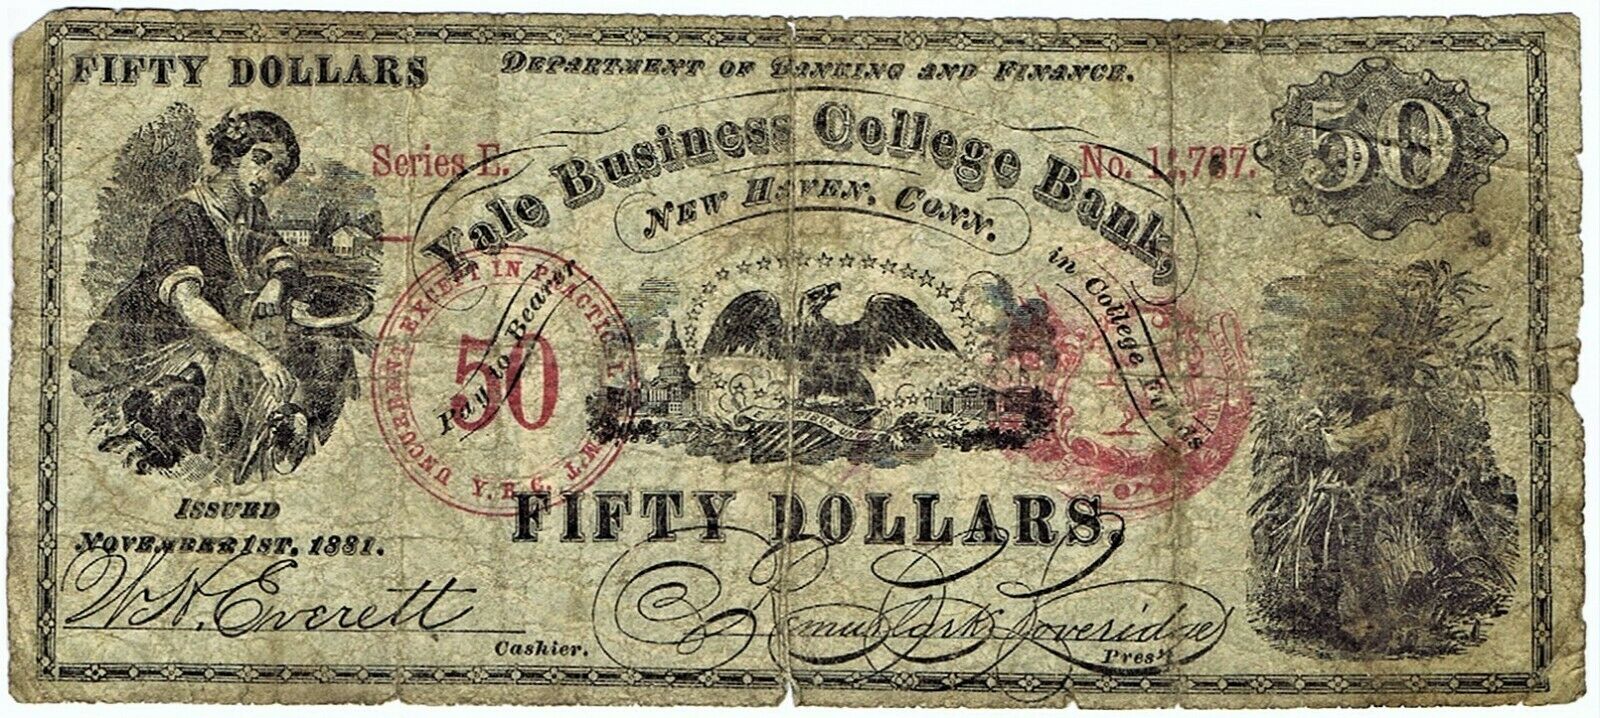 $50 YALE BUSINESS BANK (NEW HAVEN CT) of 1881 SCHINGOETHE CT-312-50 WELL CIRC